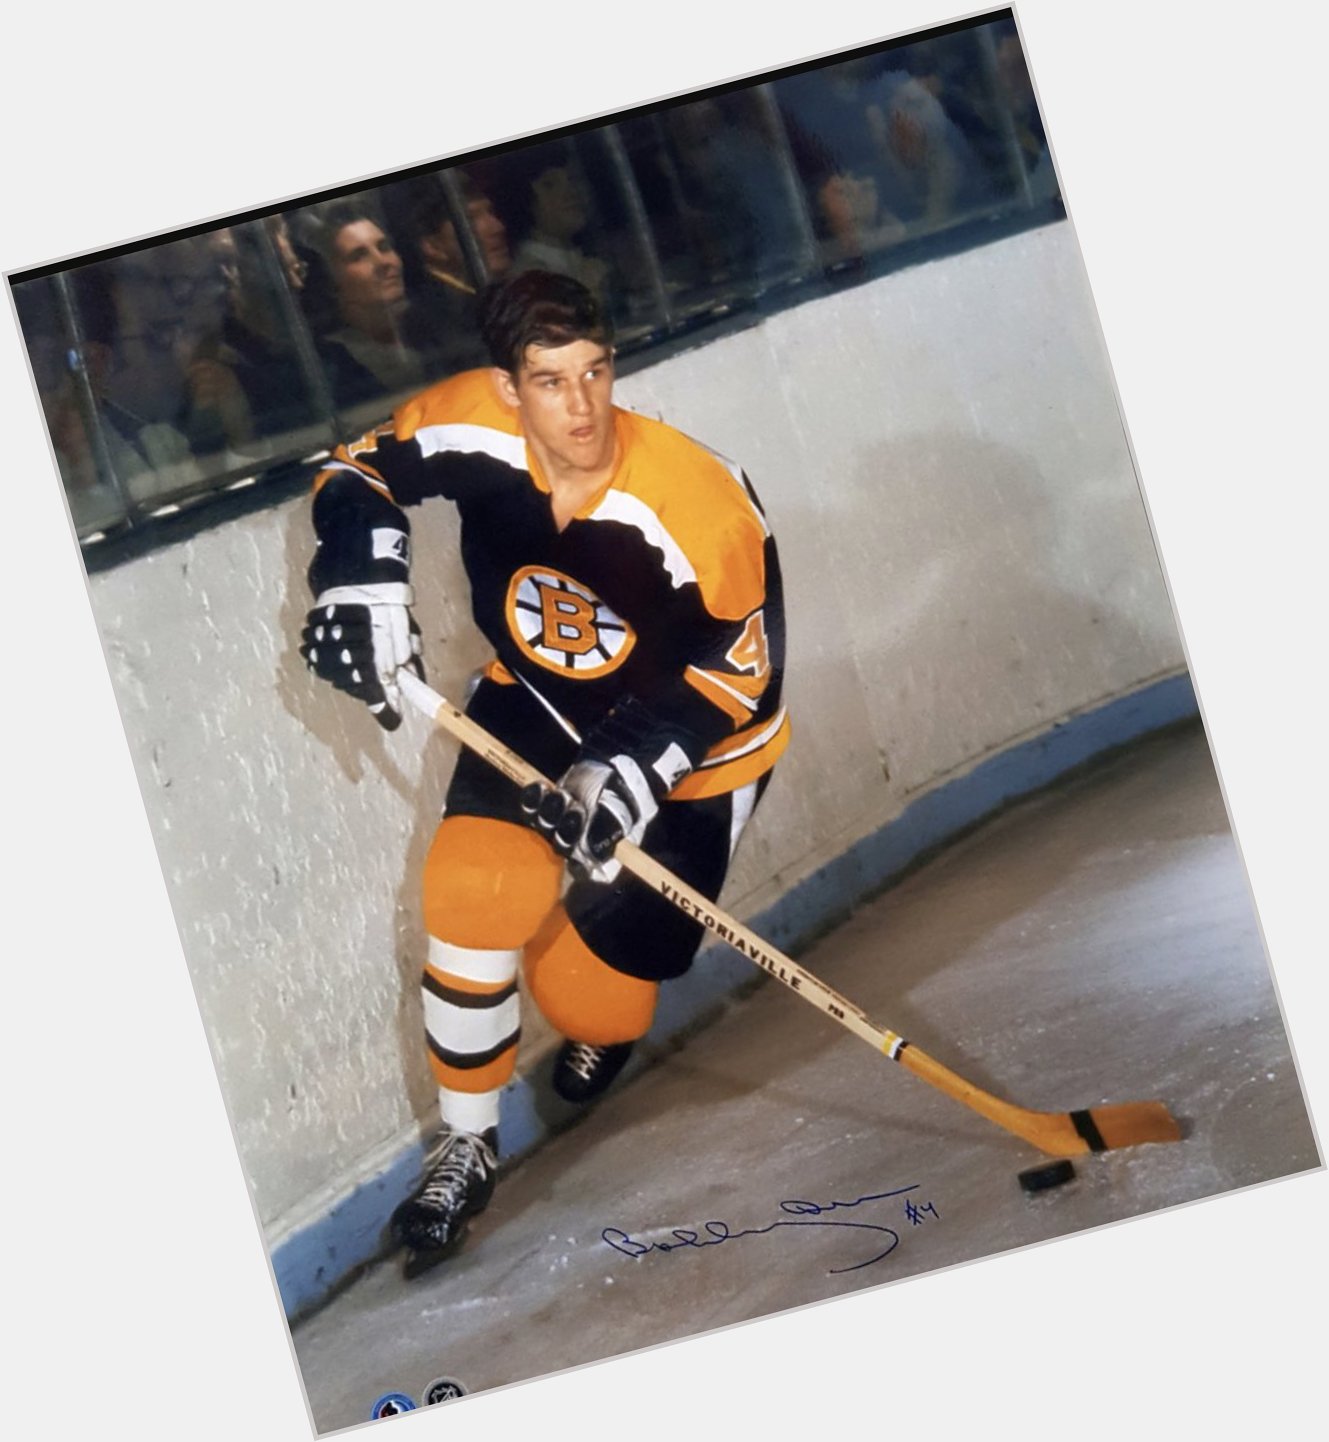 Happy 72nd birthday to Number 4, Bobby Orr! 